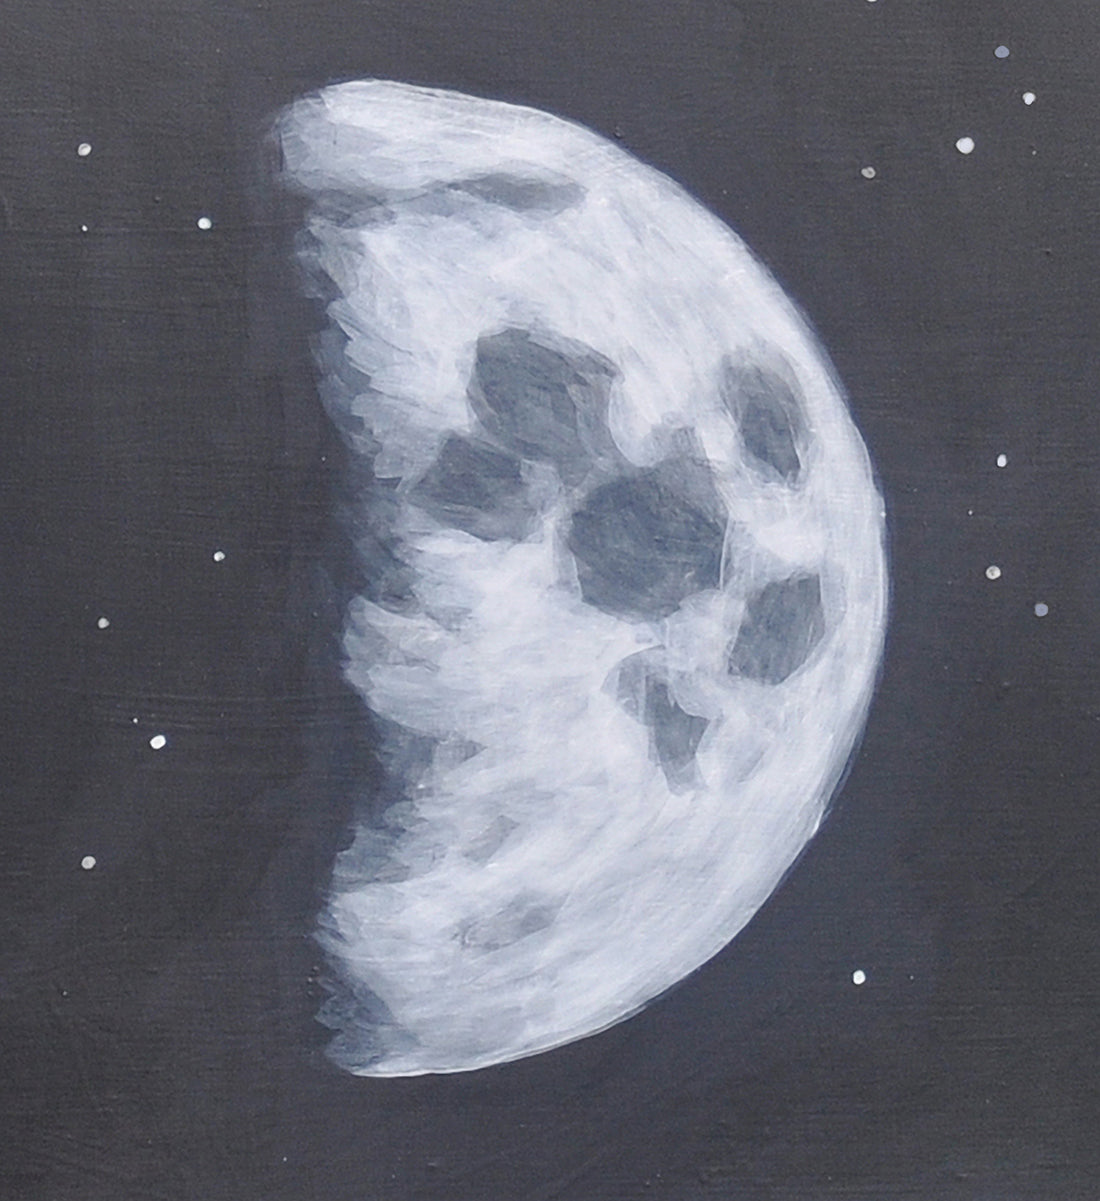 Claire De La Lune -  a painting of the full moon cycle